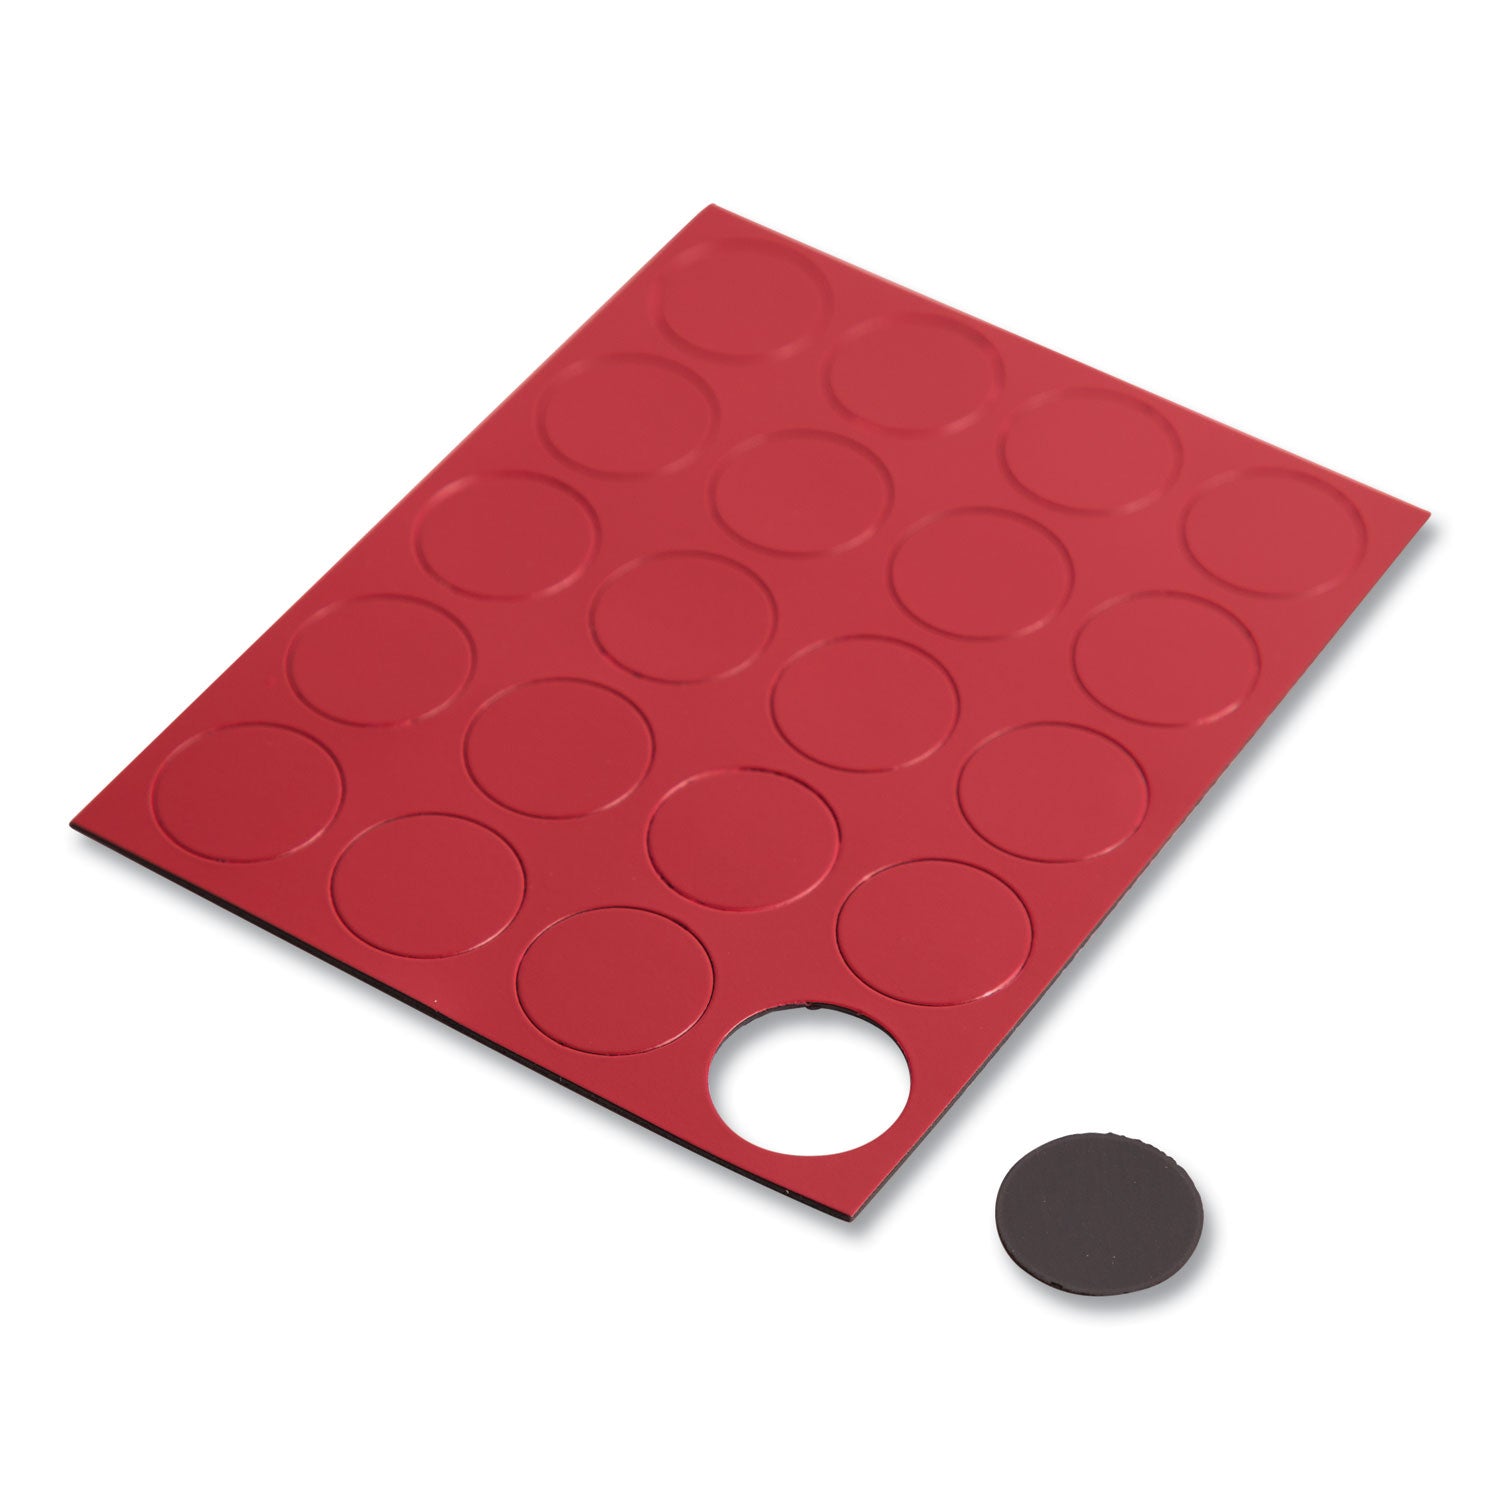 heavy-duty-board-magnets-circles-red-075-diameter-20-pack_ubrfm1604 - 2